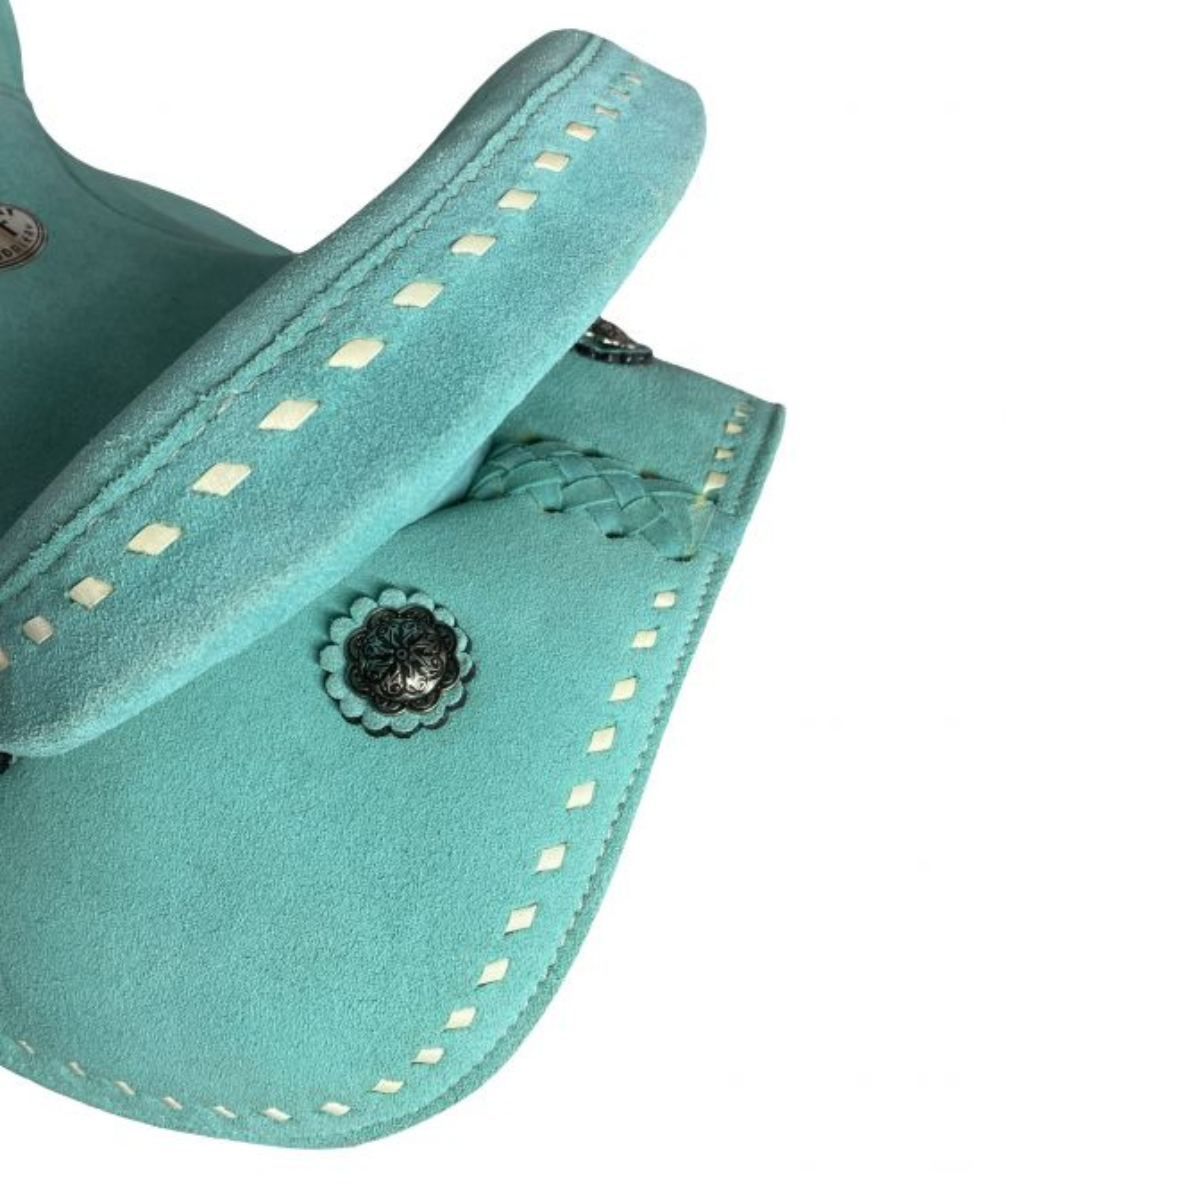 10" Double T Barrel style saddle with Teal Rough out leather - Double T Saddles